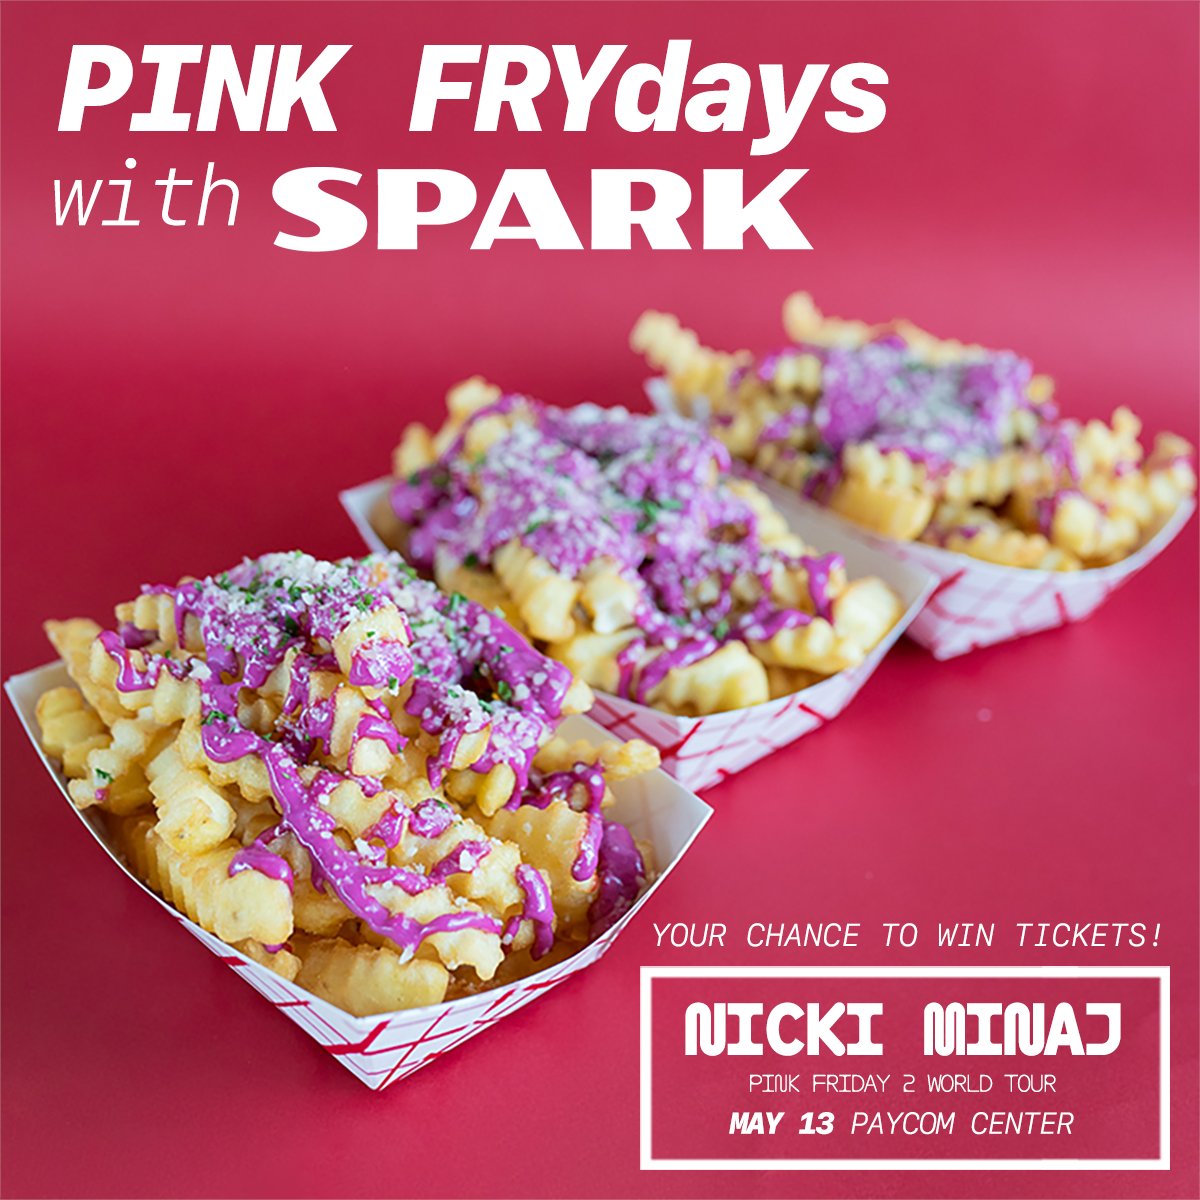 Celebrate Pink FRYdays in #OKC leading up to Nicki Minaj on 5/13! Head to Spark, grab your Pink Fries, and post a photo to socials tagging both @eatatspark and @PaycomCenter with #pinkfryday for a chance to win tickets. 🍟 We’ll pick a winner each Friday leading up to the show!